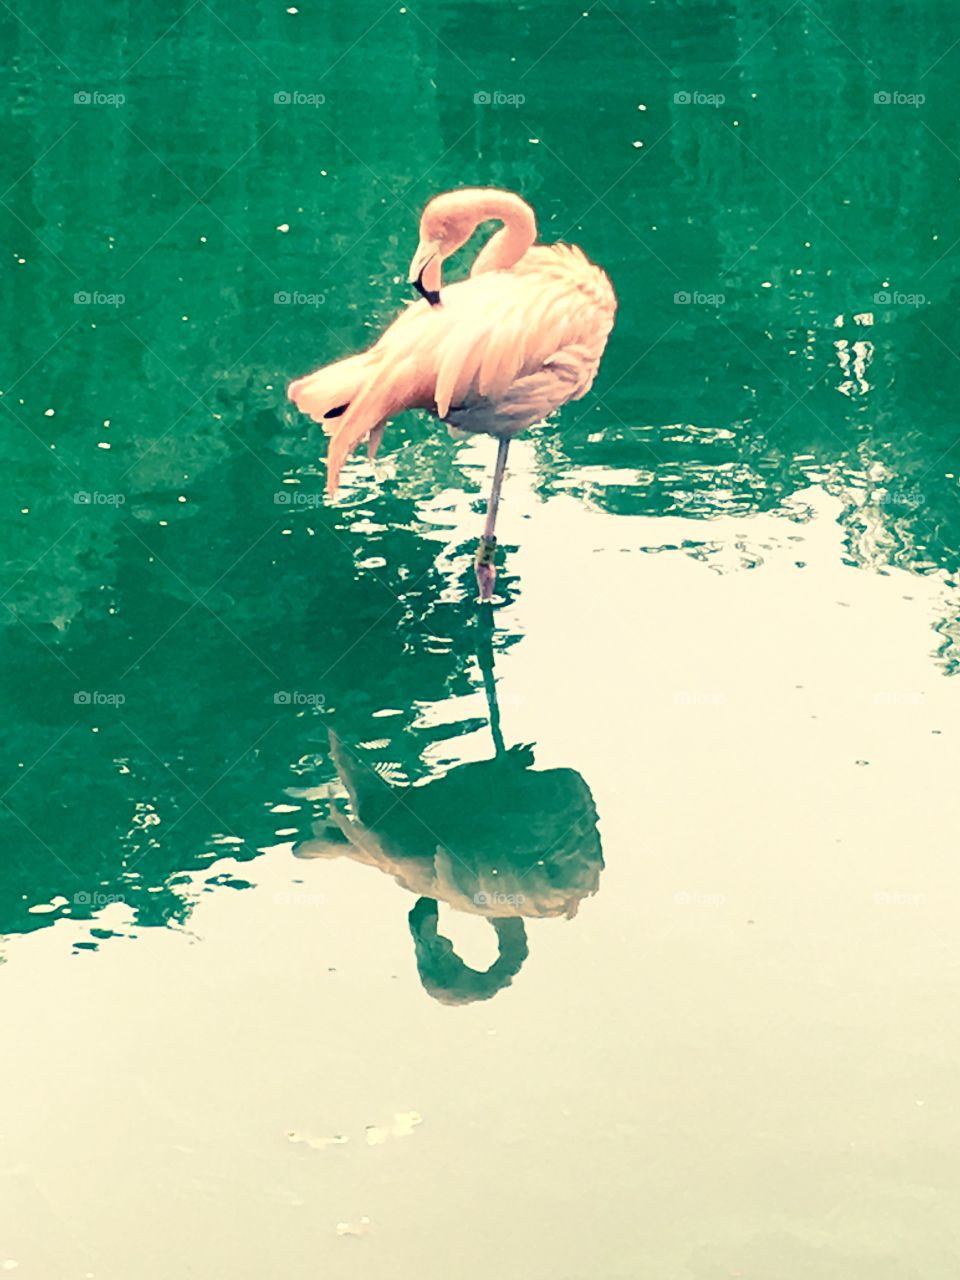 An edited, colorful picture of a single flamingo standing in water, taken at a zoo 